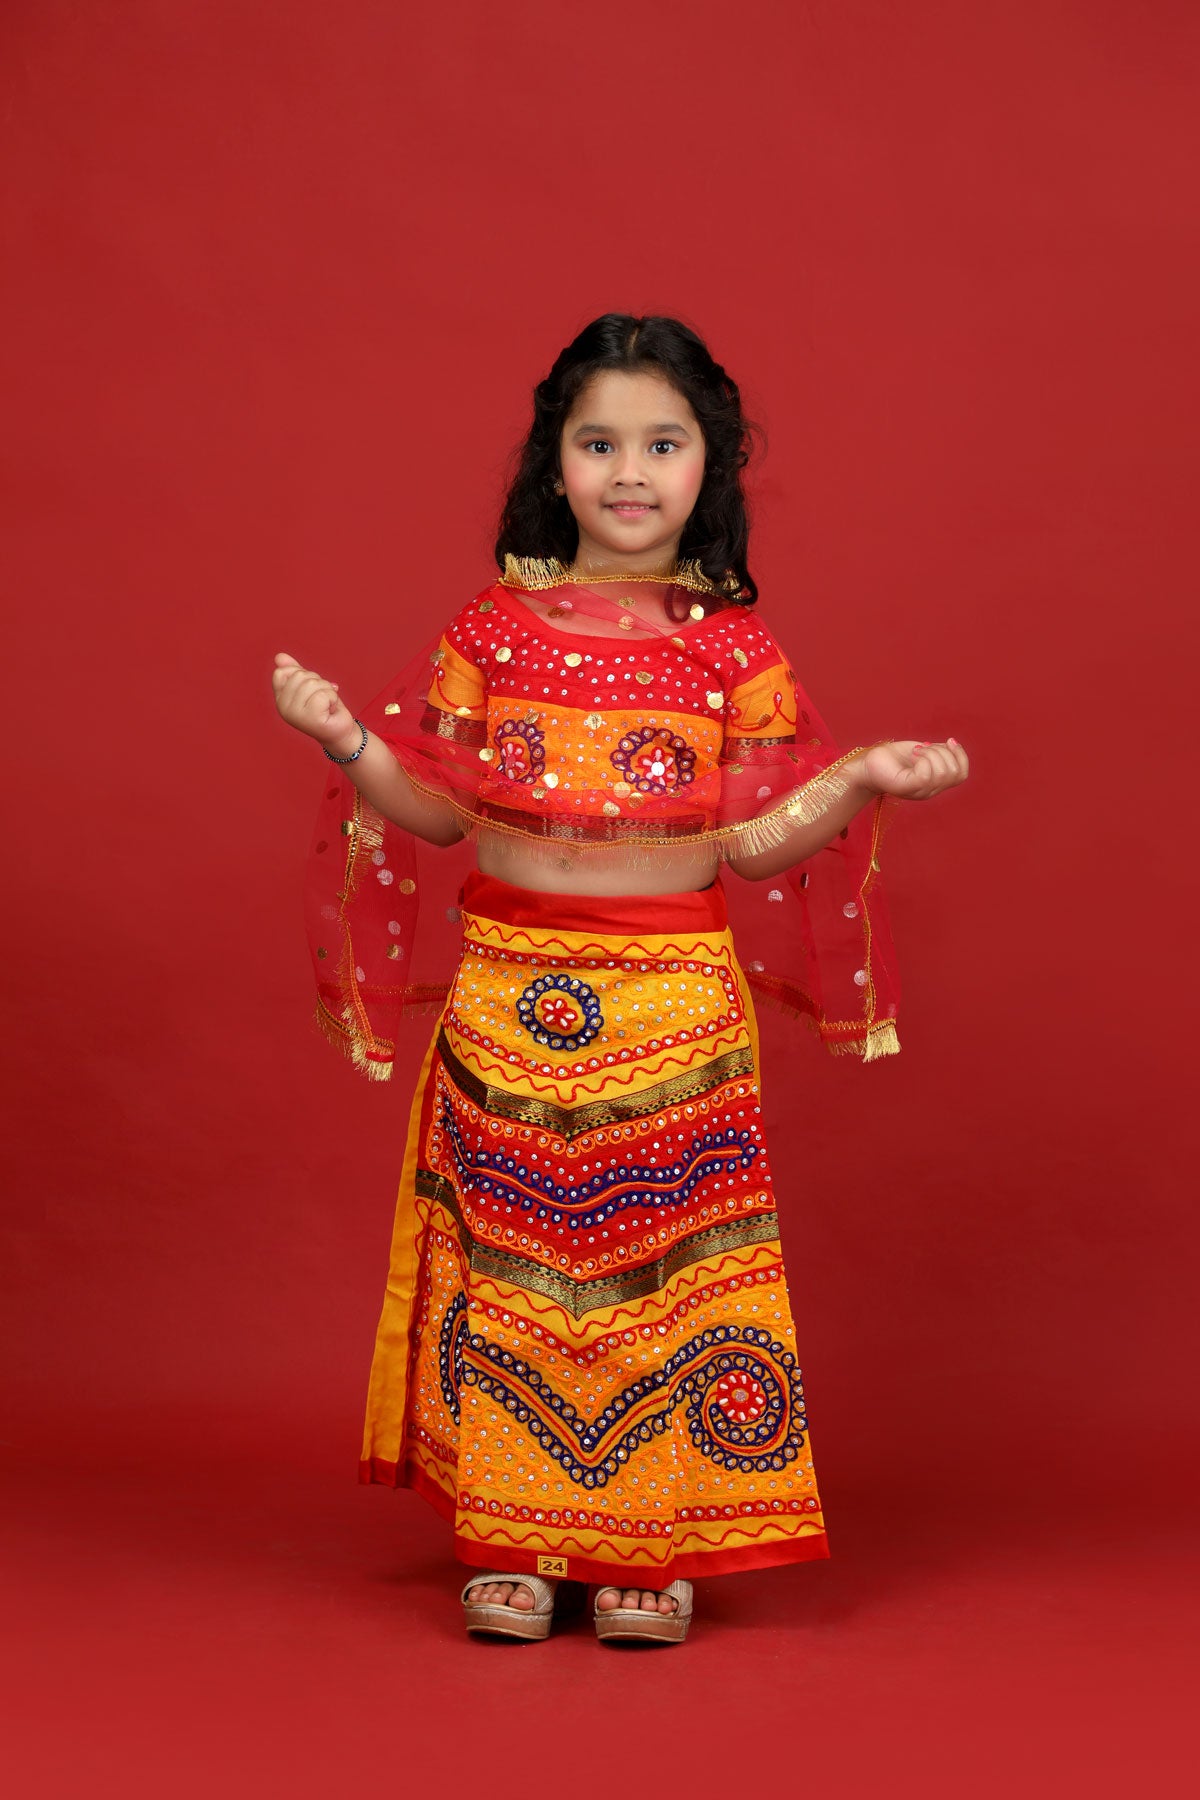 Radha Gujarat Garba Navratri Indian State Fancy Dress Costume For Girls And  Women At Rs Online Store Items Bookmycostume, New Delhi ID: 24012795591 |  lupon.gov.ph